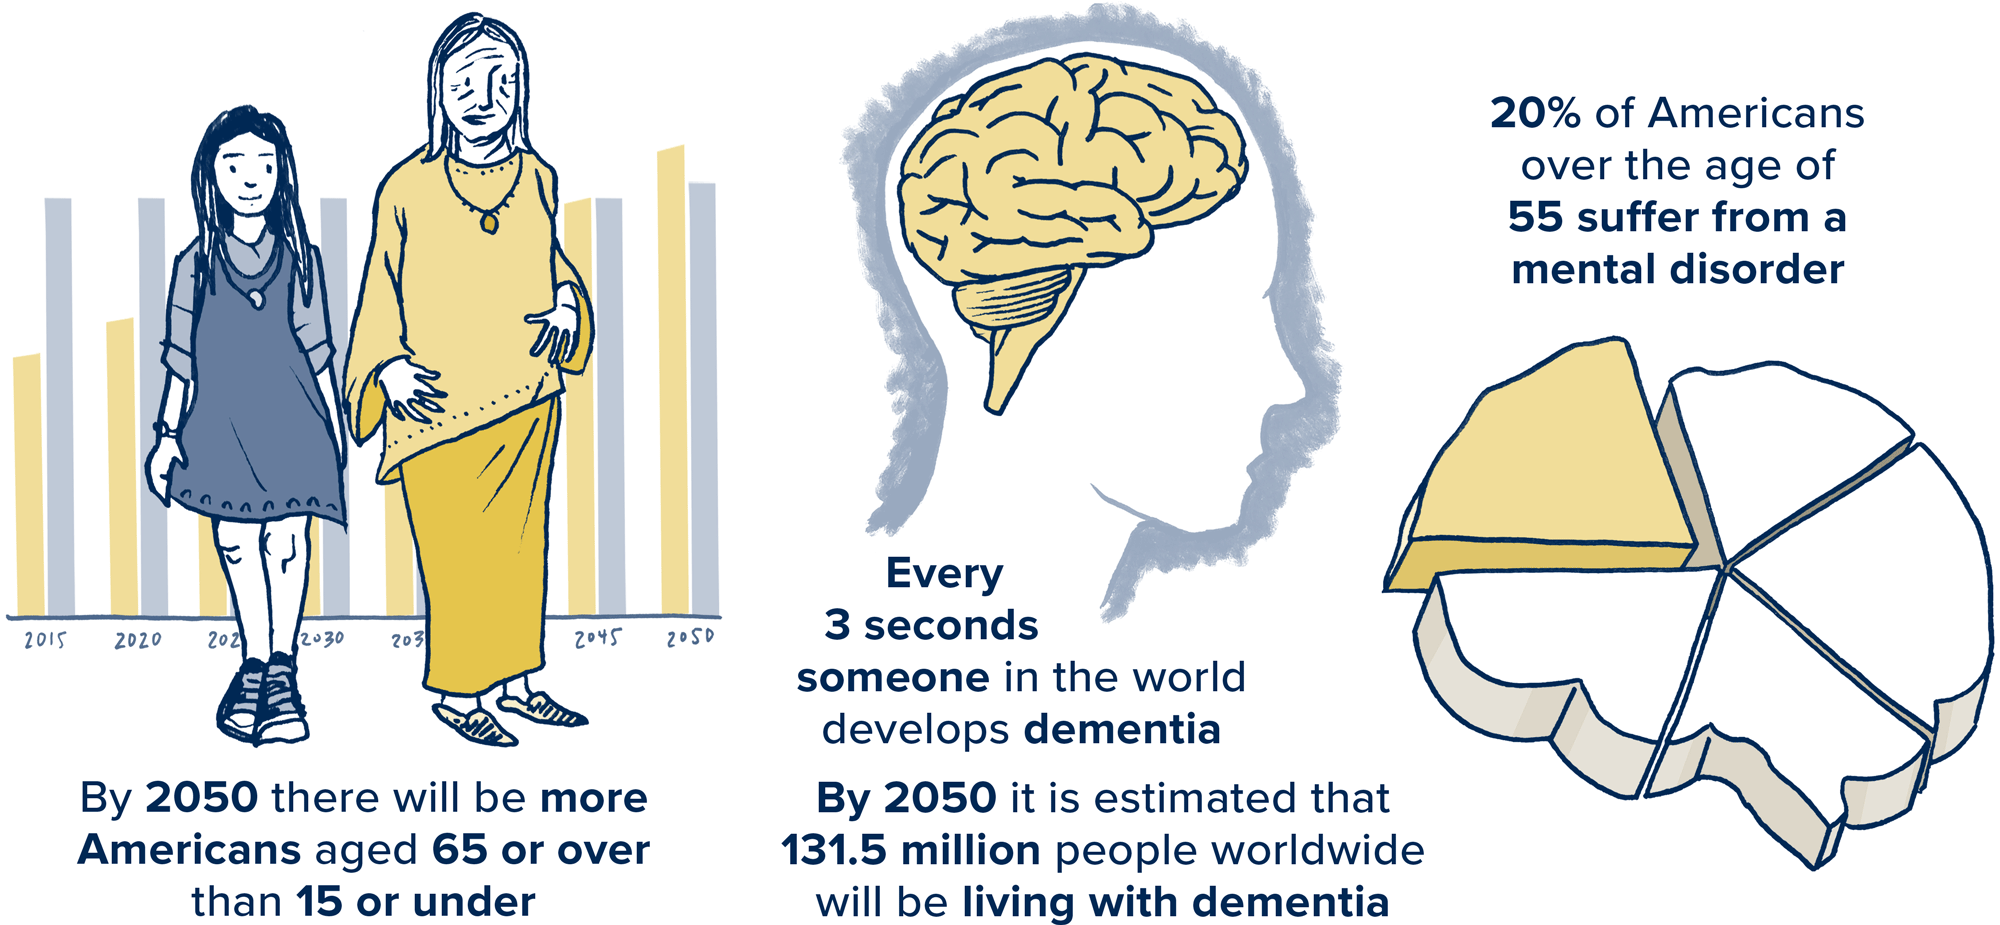 Aging statistics in the US and neurodevelopmental disorders like dementia prevention and statistics based on brain research at UC Davis.